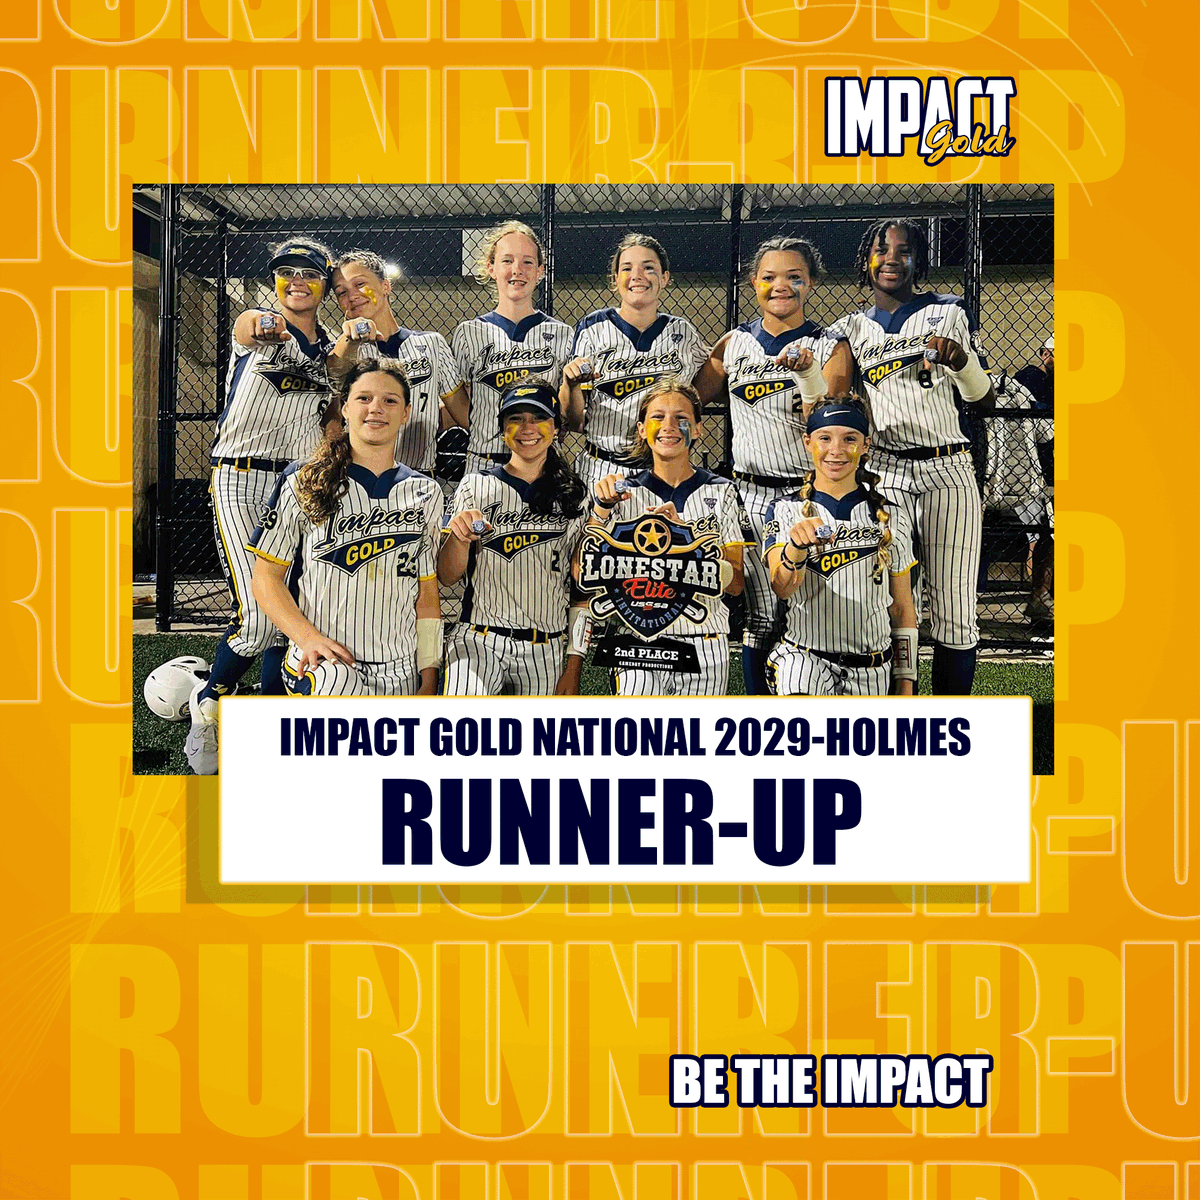 Congratulations to Impact Gold National Holmes on going 6-1 and finishing RUNNER-UP in the Lone Star Elite Invitational!! Great job, ladies! #betheimpact #goldblooded #impactgoldnationalholmes